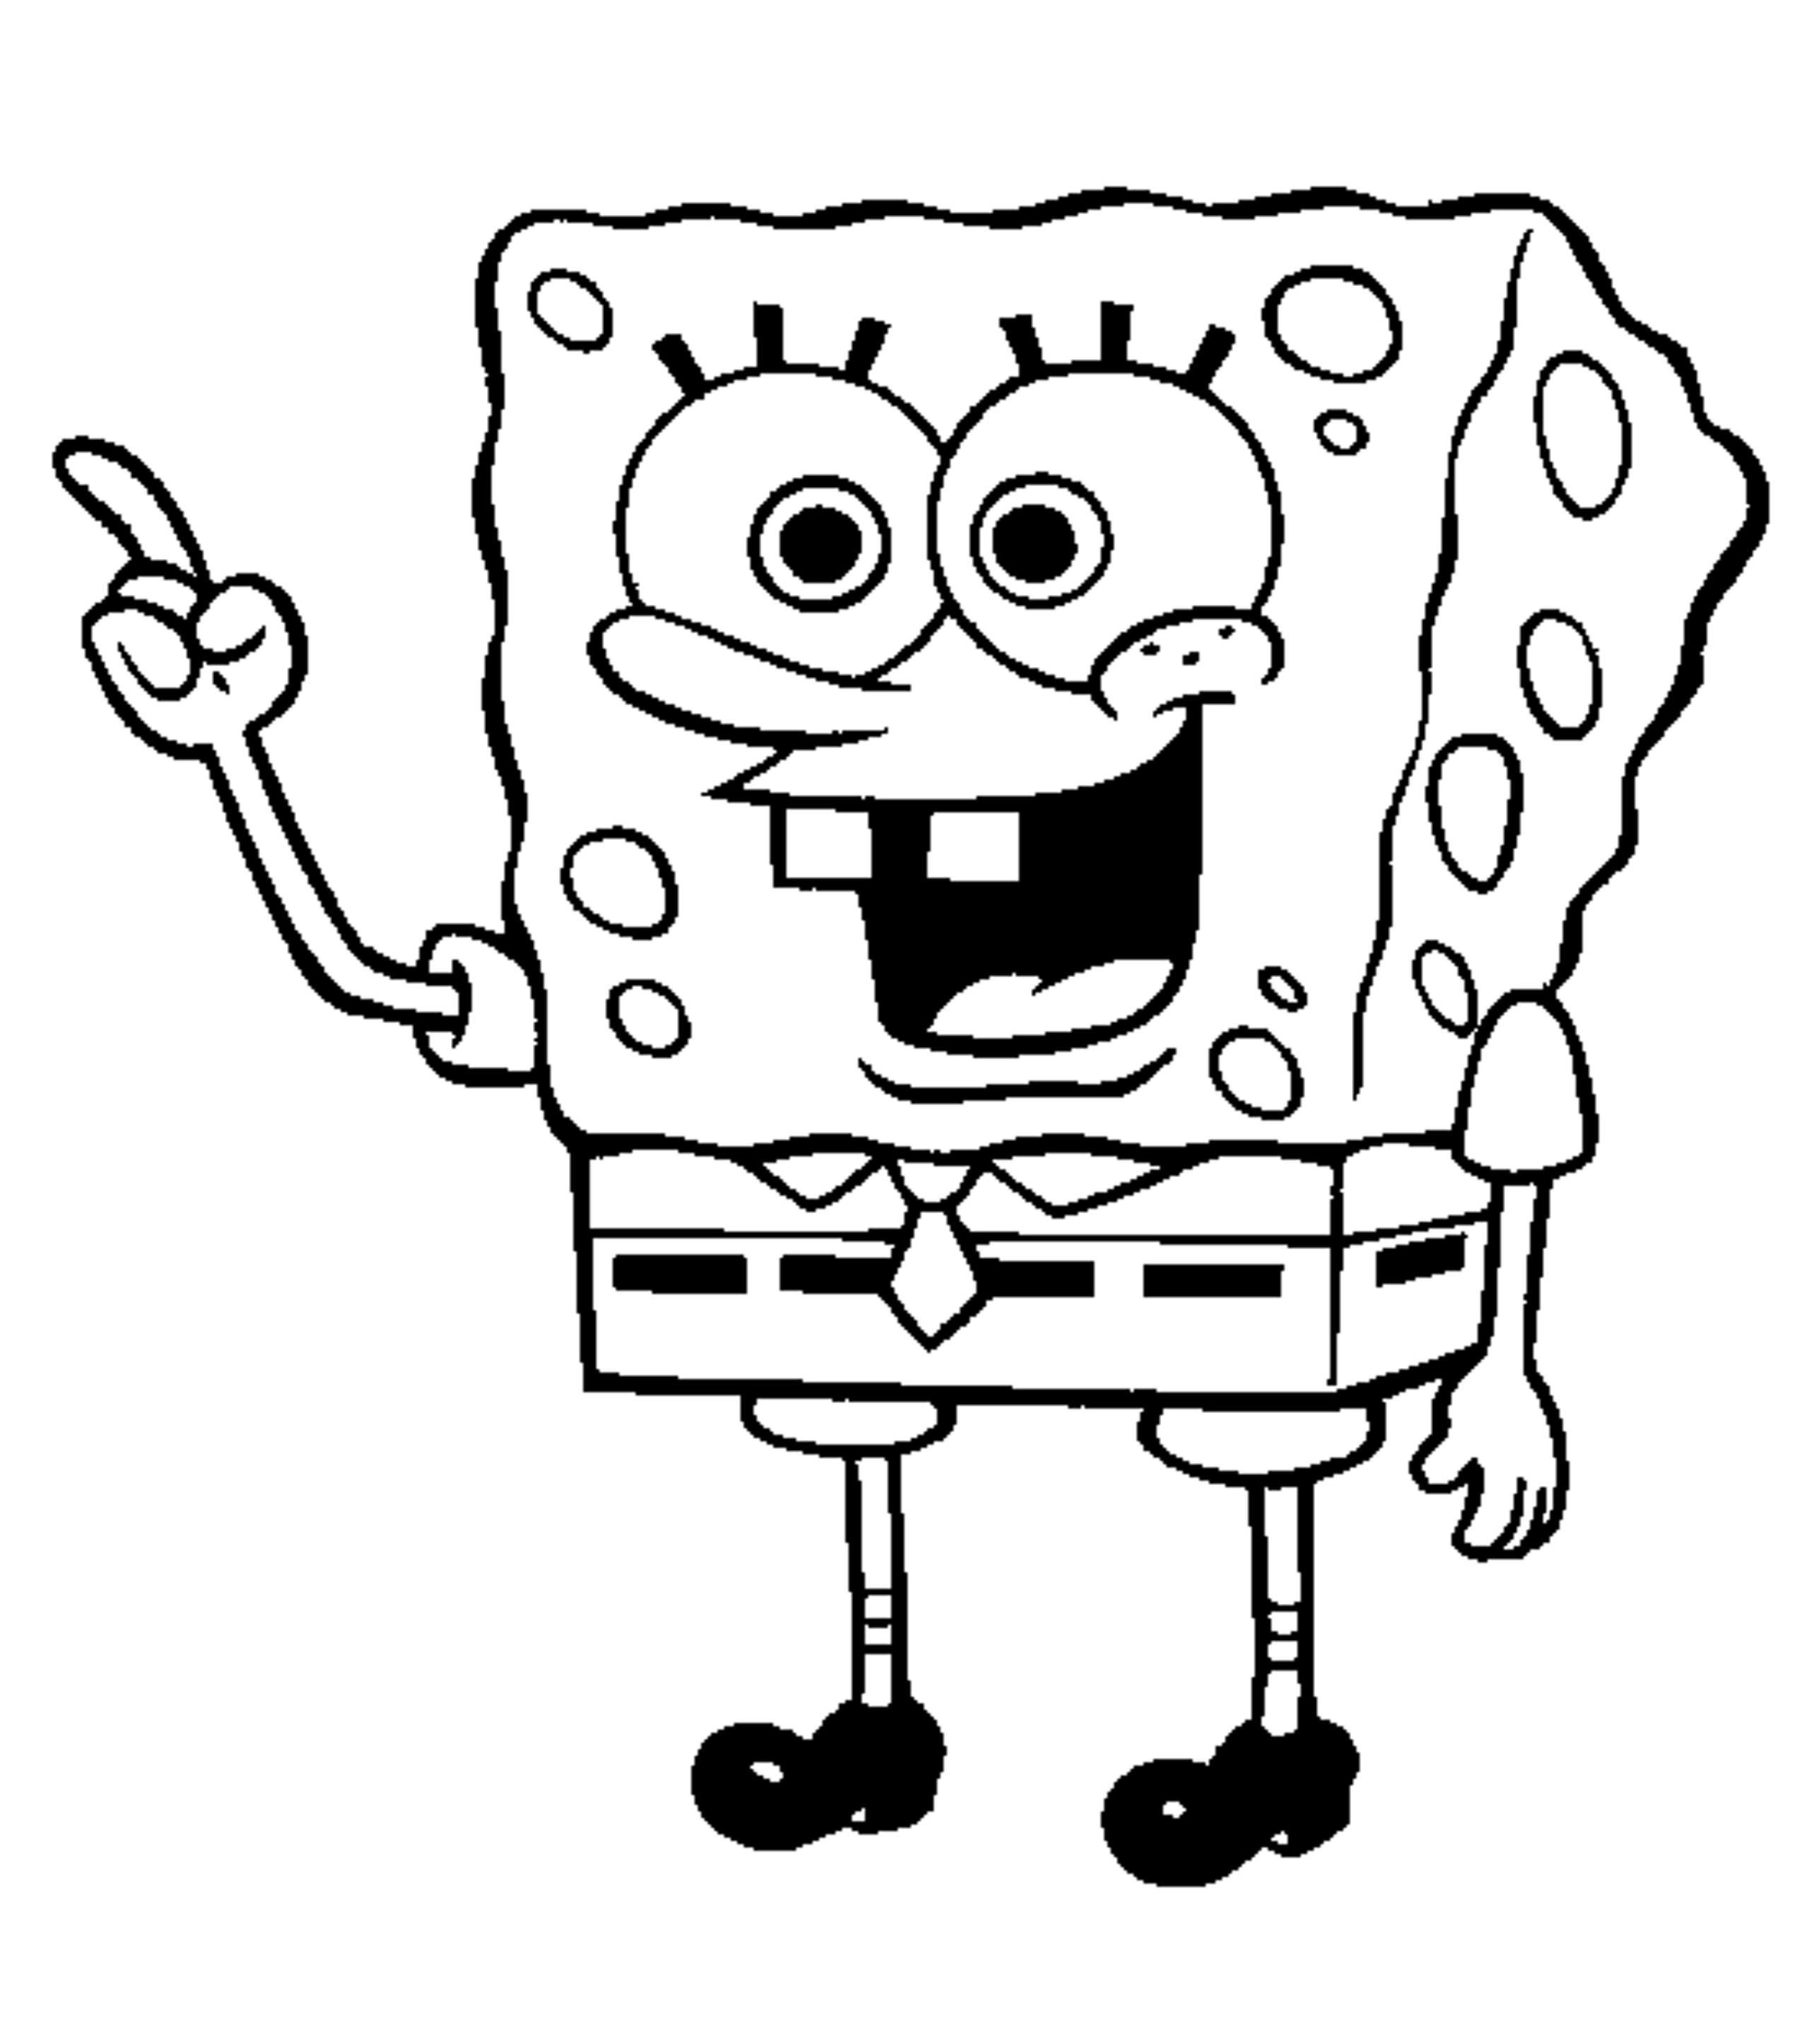 Easy Spongebob Coloring Pages at GetDrawings Free download